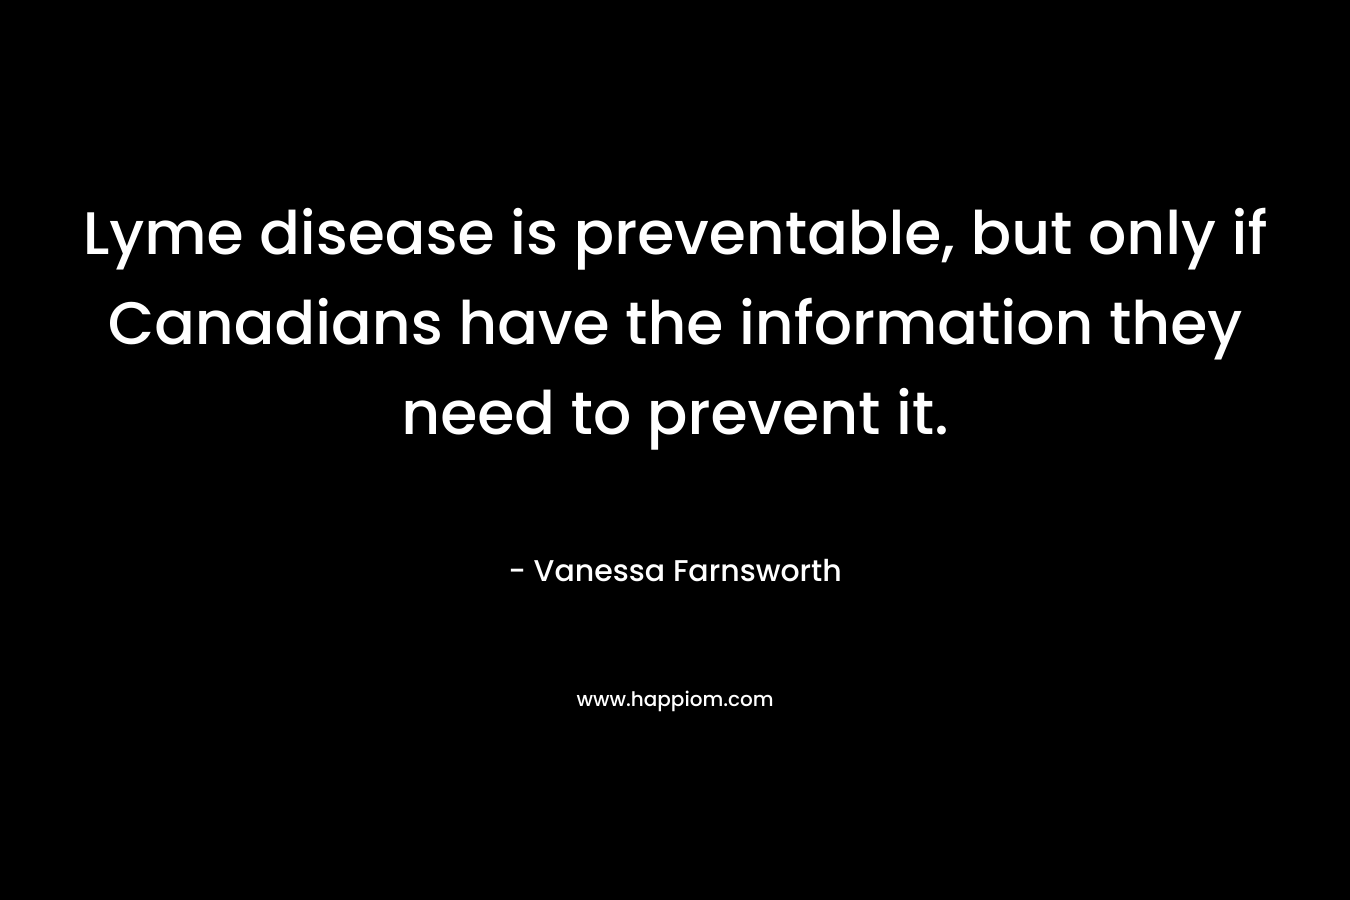 Lyme disease is preventable, but only if Canadians have the information they need to prevent it. – Vanessa Farnsworth